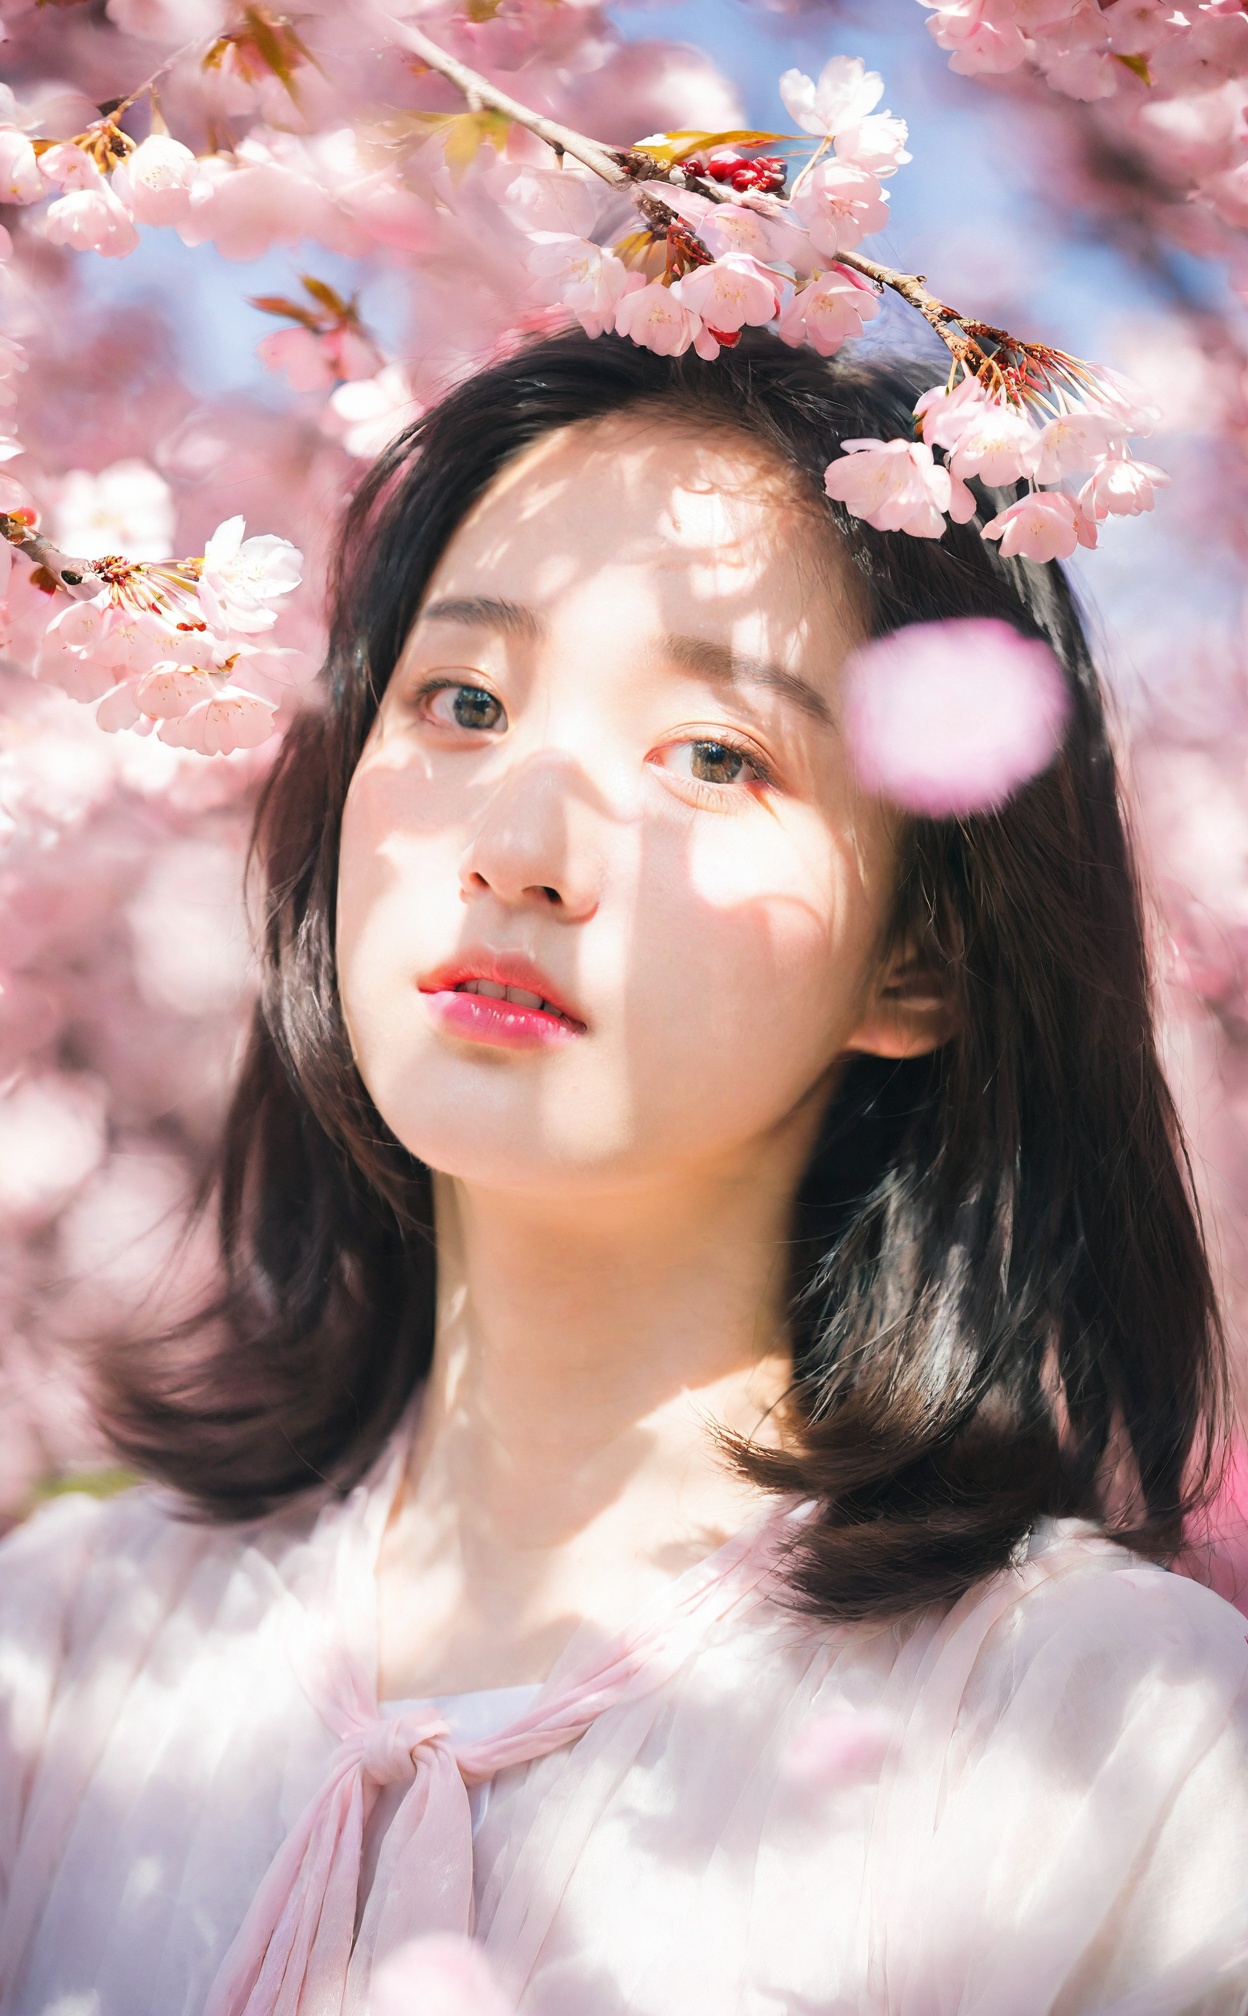 mugglelight, a girl with a dreamy expression, surrounded by floating cherry blossom petals in a soft breeze, springtime magic, gentle radiance.korean girl,black hair,